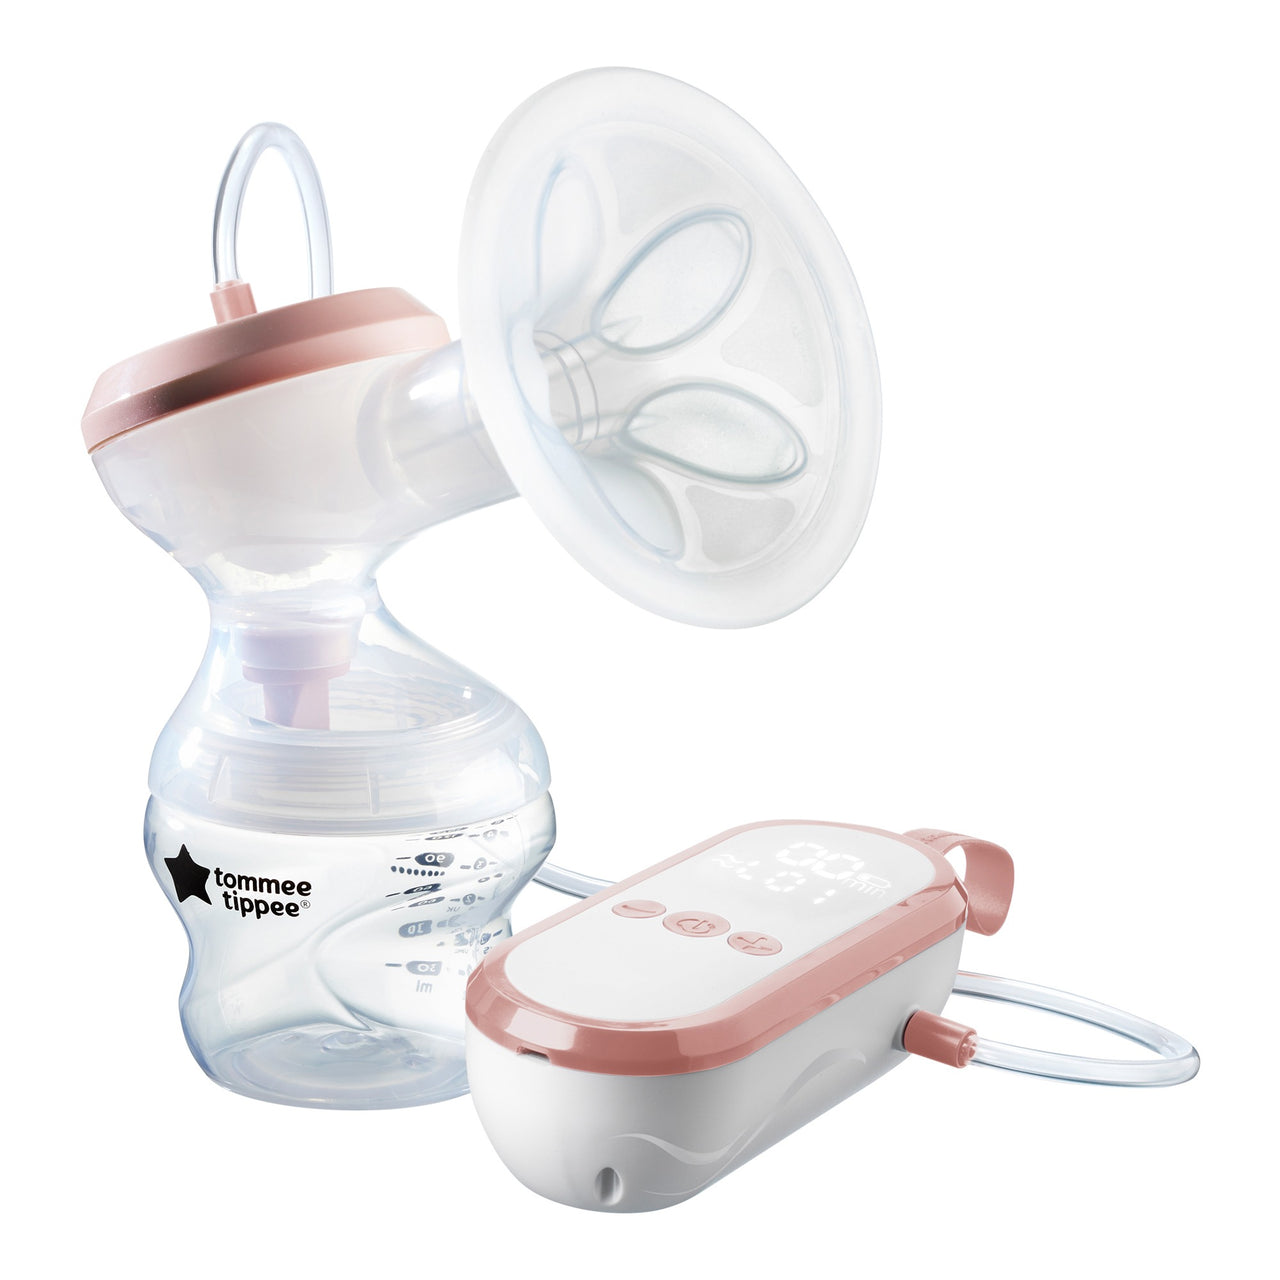 Made For Me Electric Breast Pump